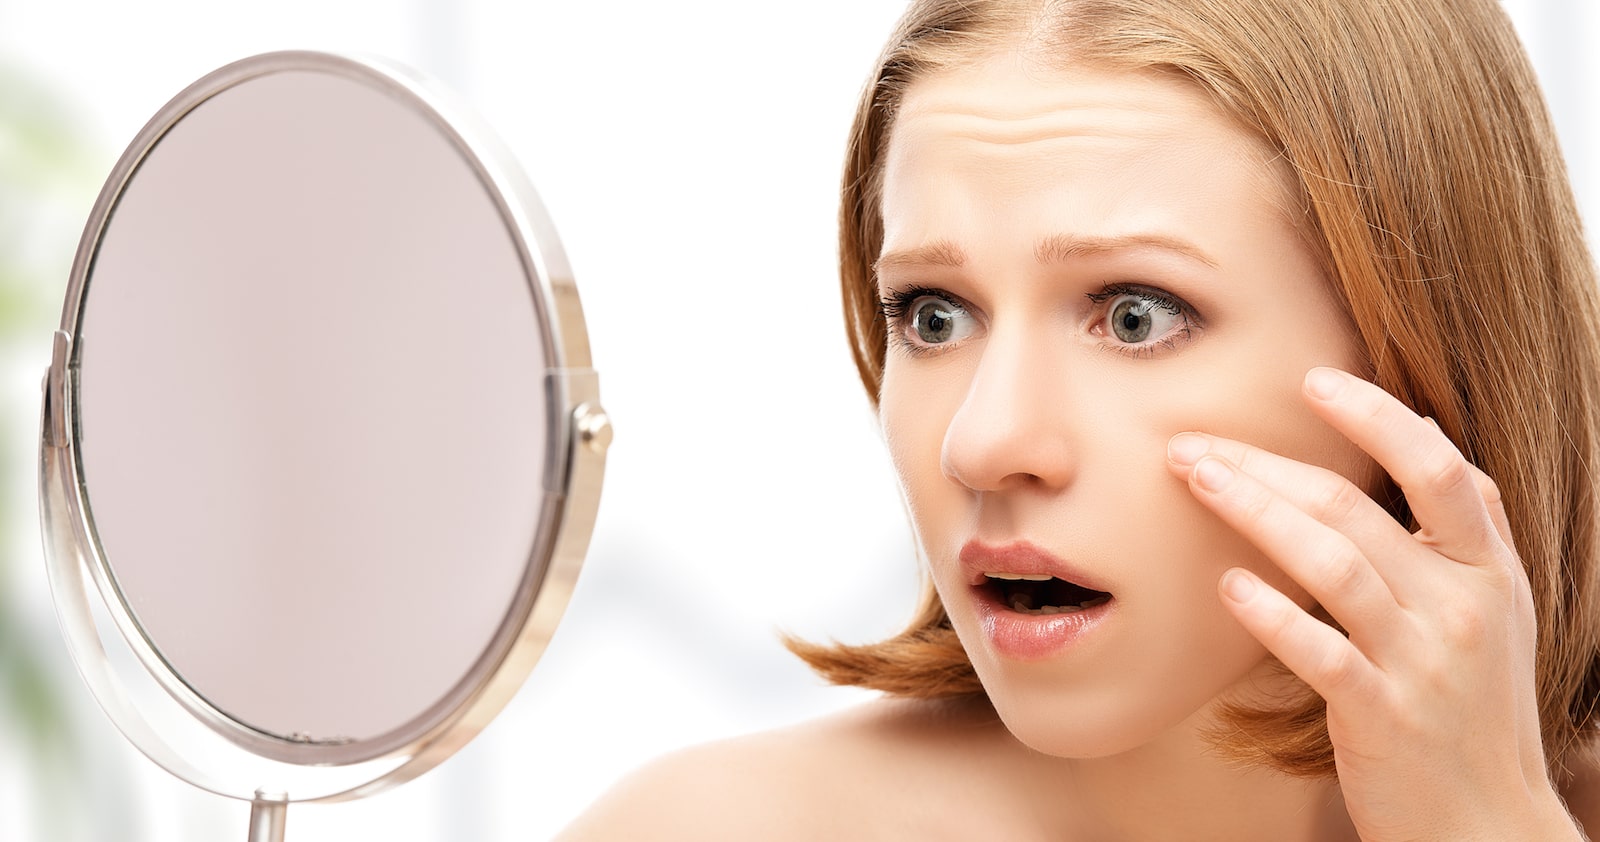 See cosmetic procedures that get results with one treatment